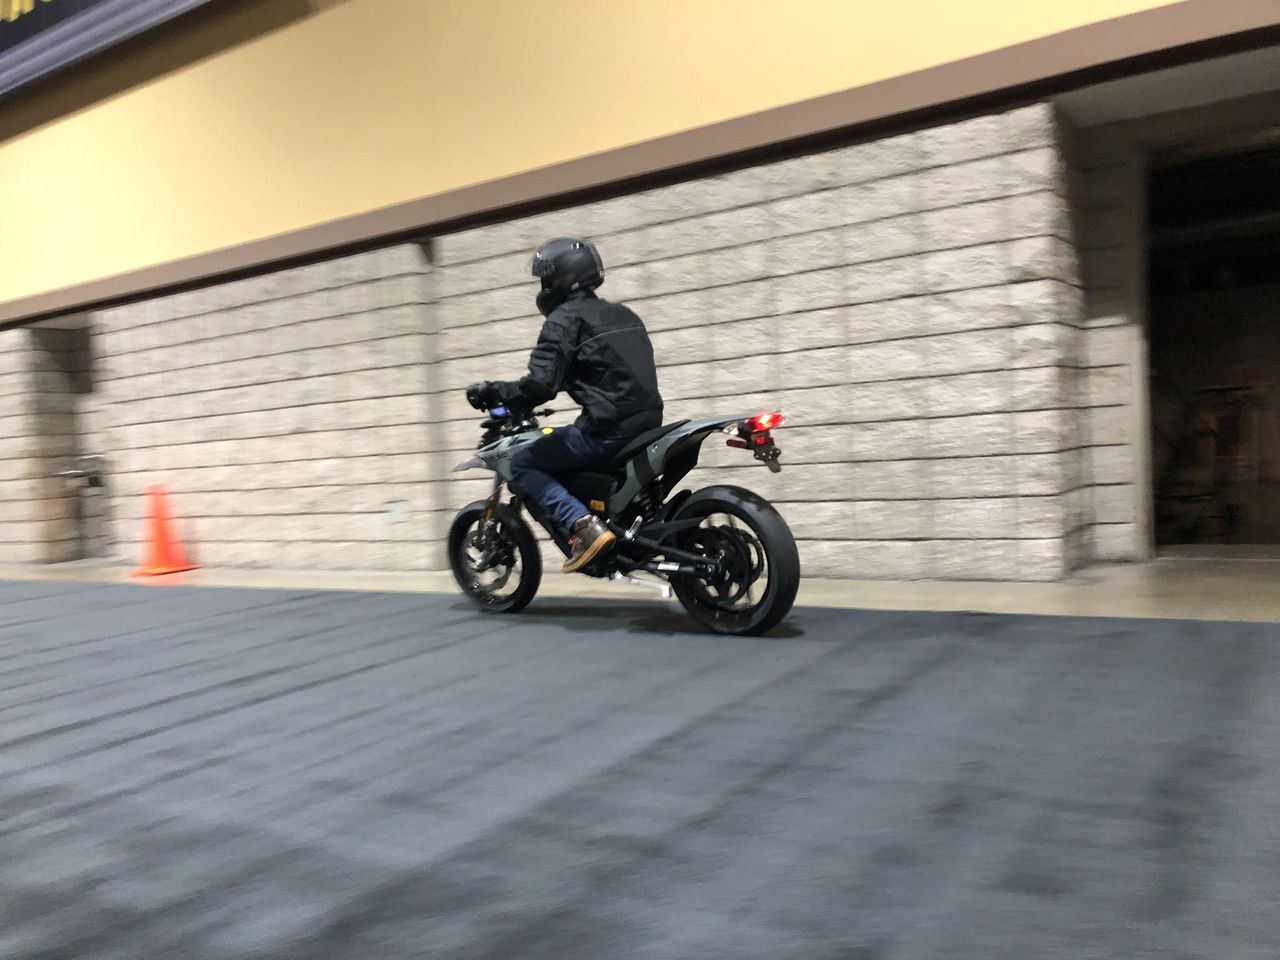 This was my first test-ride on carpet 